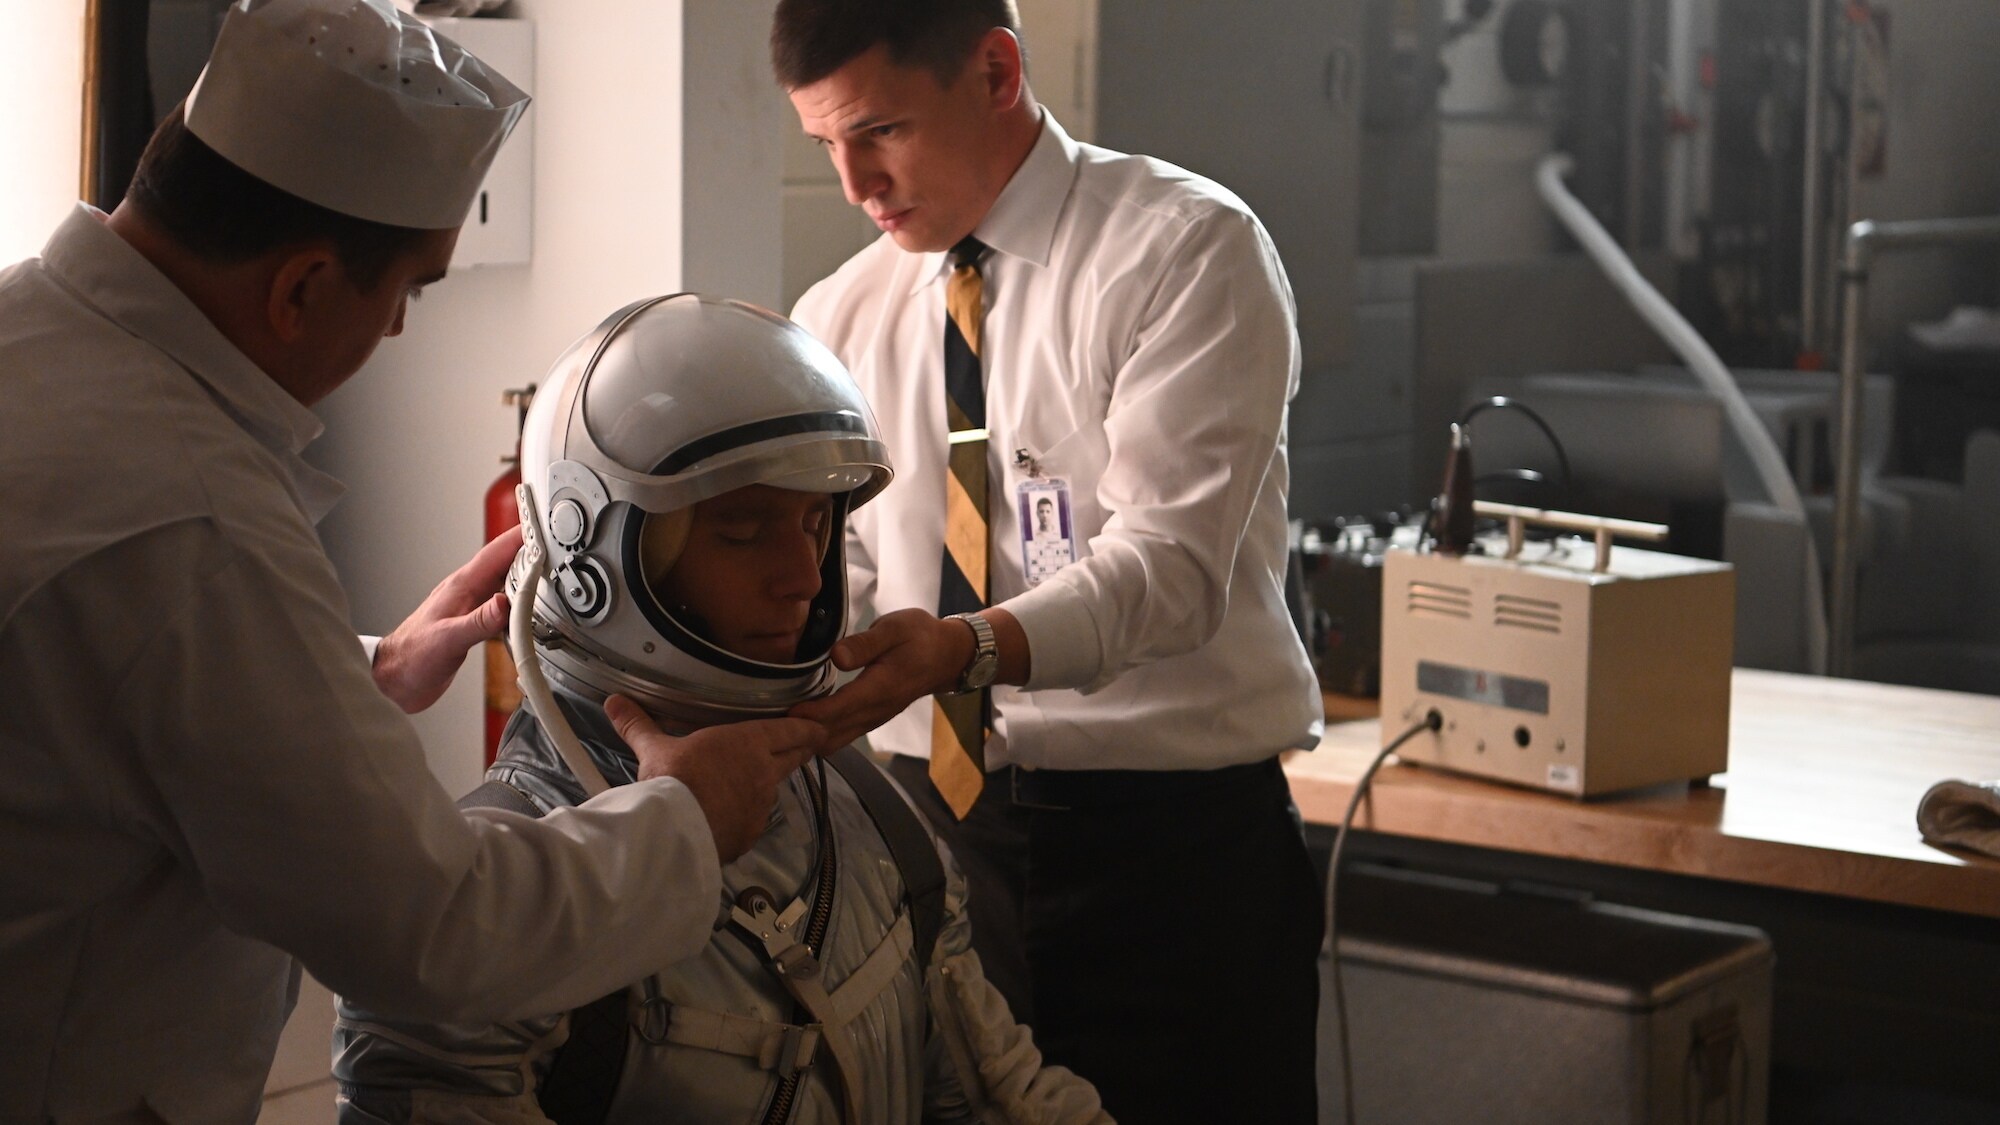 Gus Grissom (R) played Michael Trotter helps Alan Shepard (center) played by Jake McDorman with his space suit in National Geographic's THE RIGHT STUFF streaming on Disney+. (National Geographic/Gene Page)